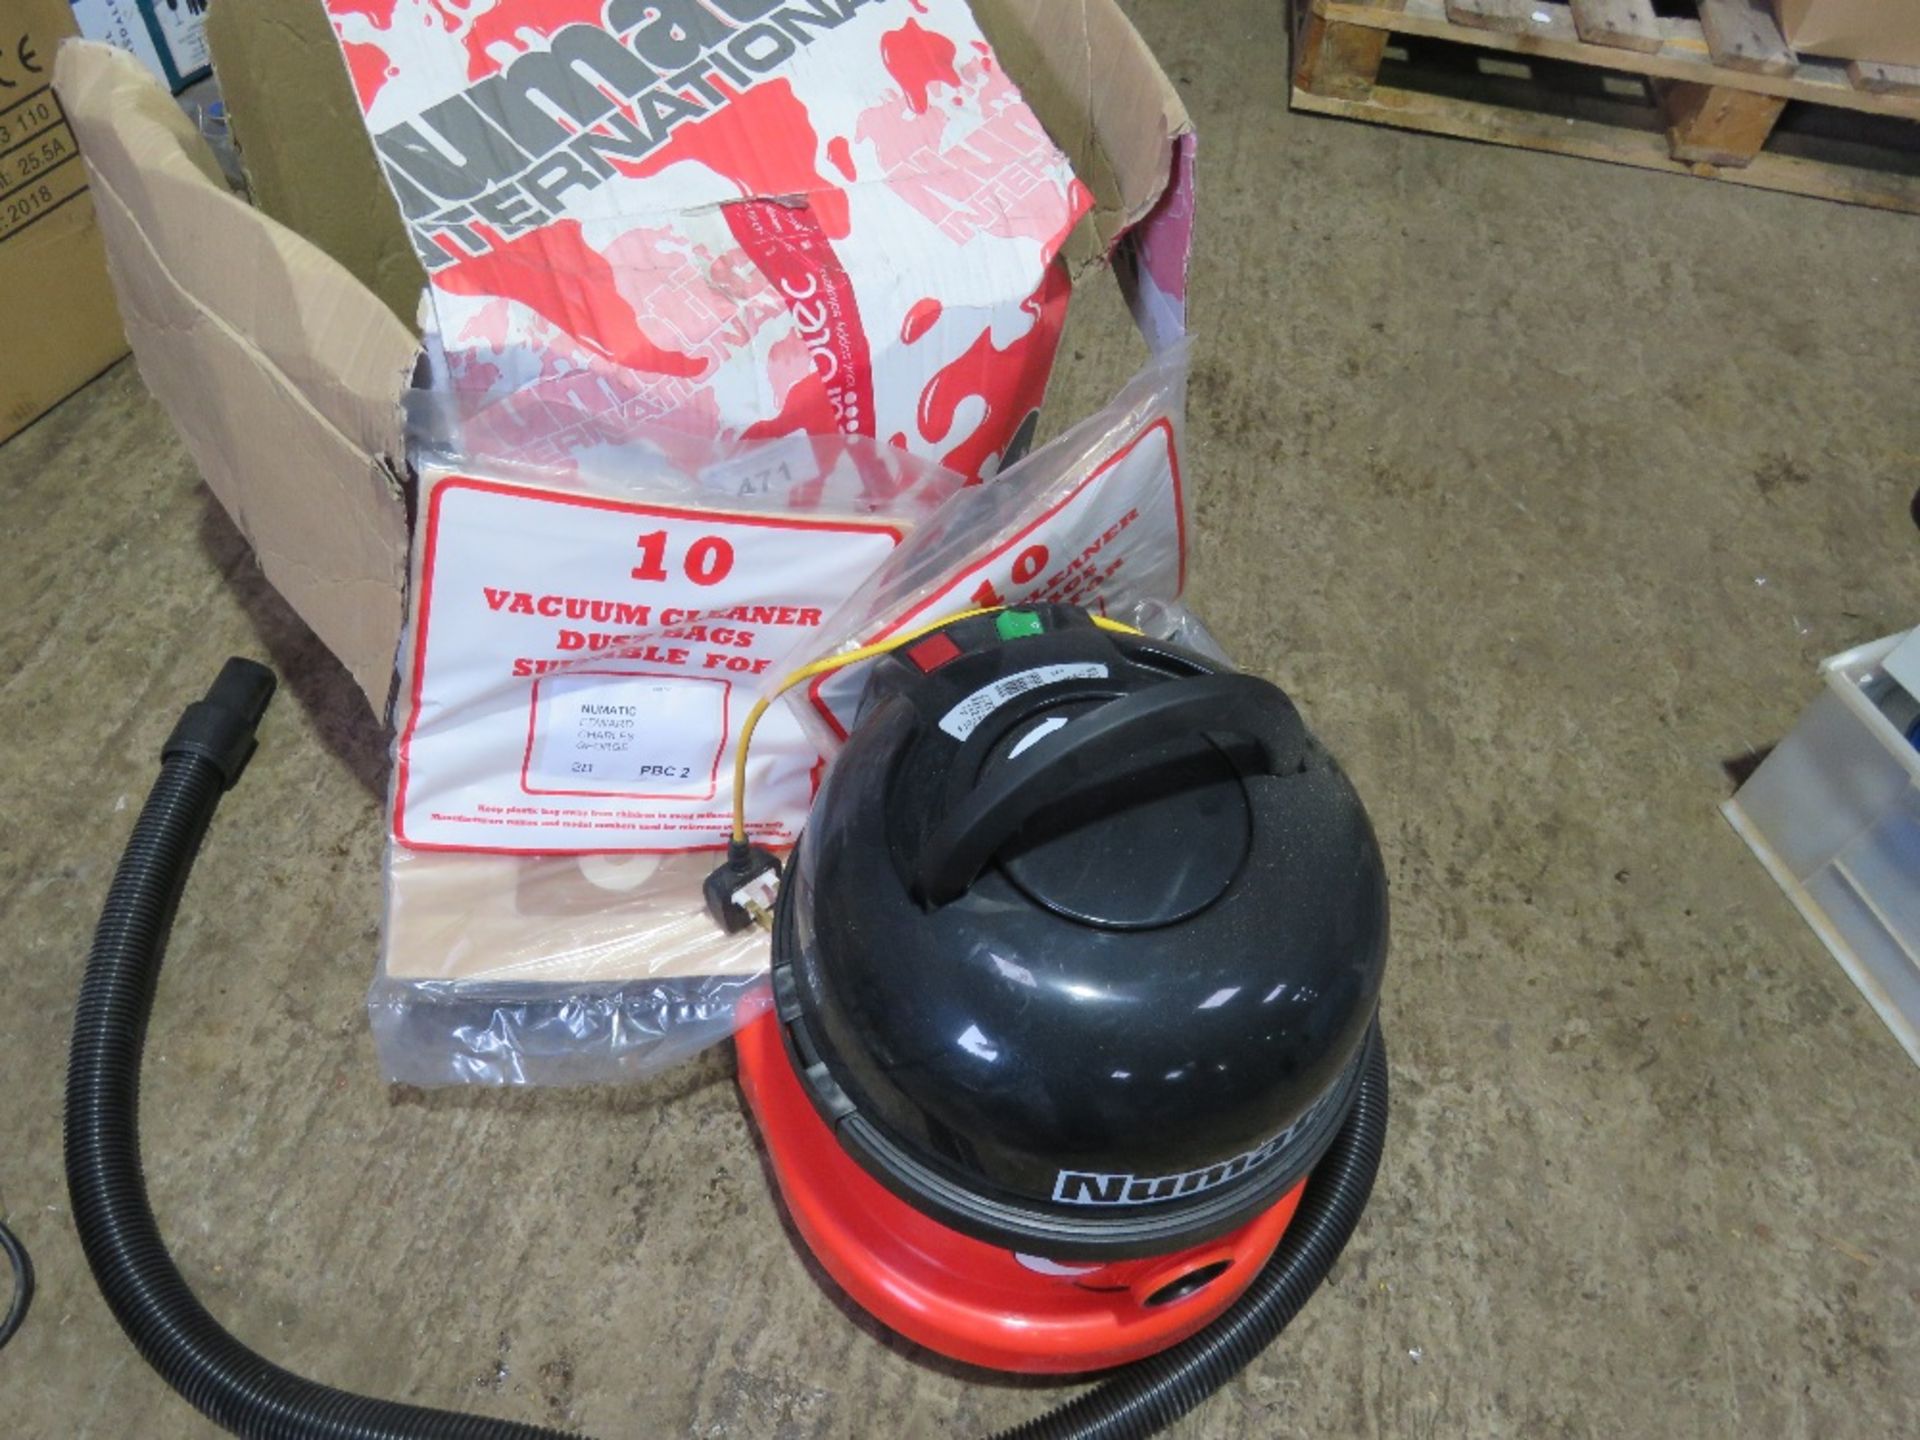 HENRY VAC AND BAGS, LITTLE USED, 240V - Image 2 of 3